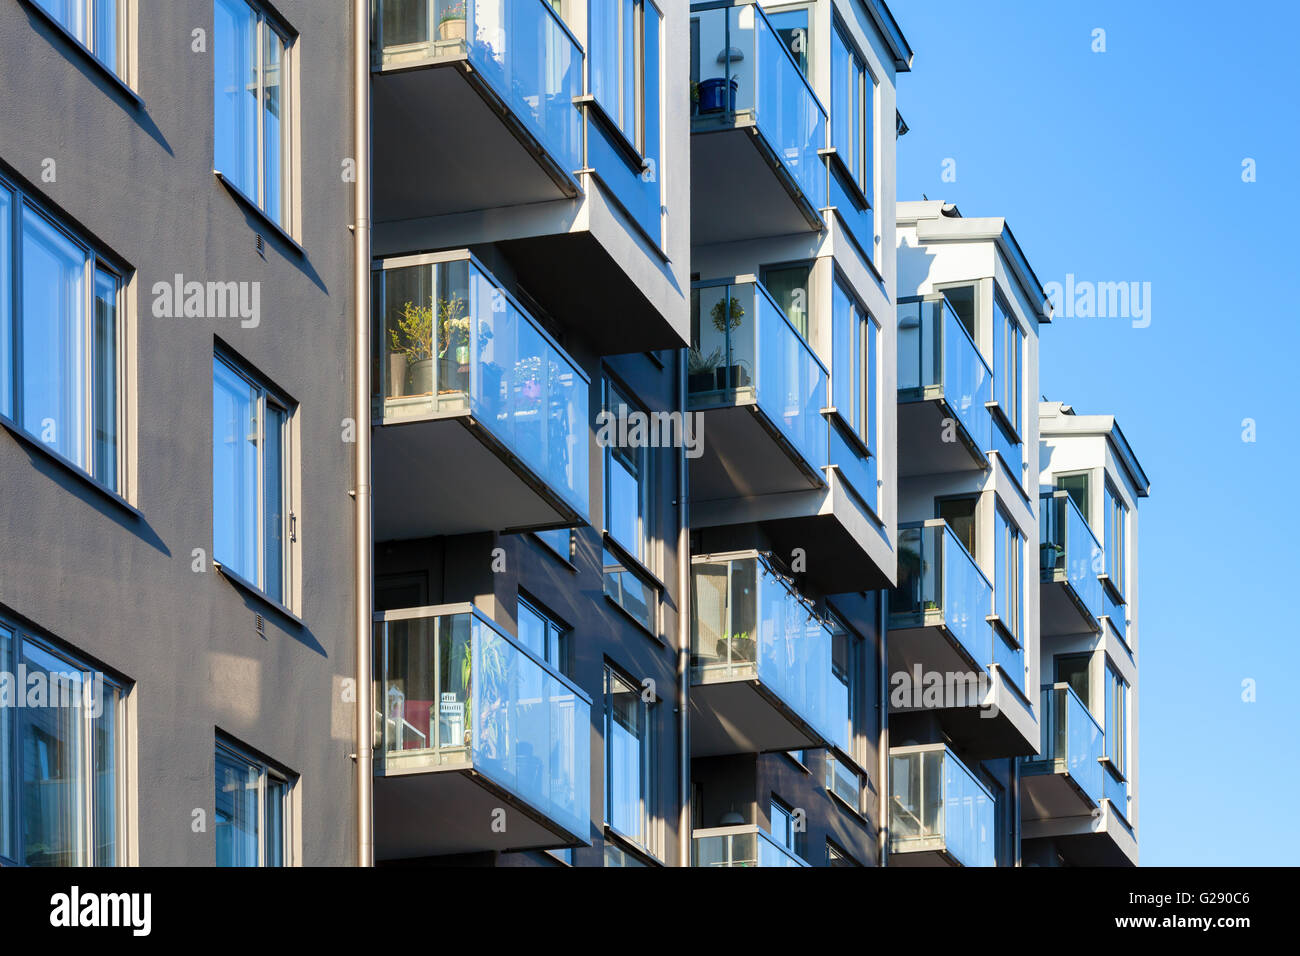 Abstract fragment of contemporary architecture, balconies with glass railings and shining windows Stock Photo